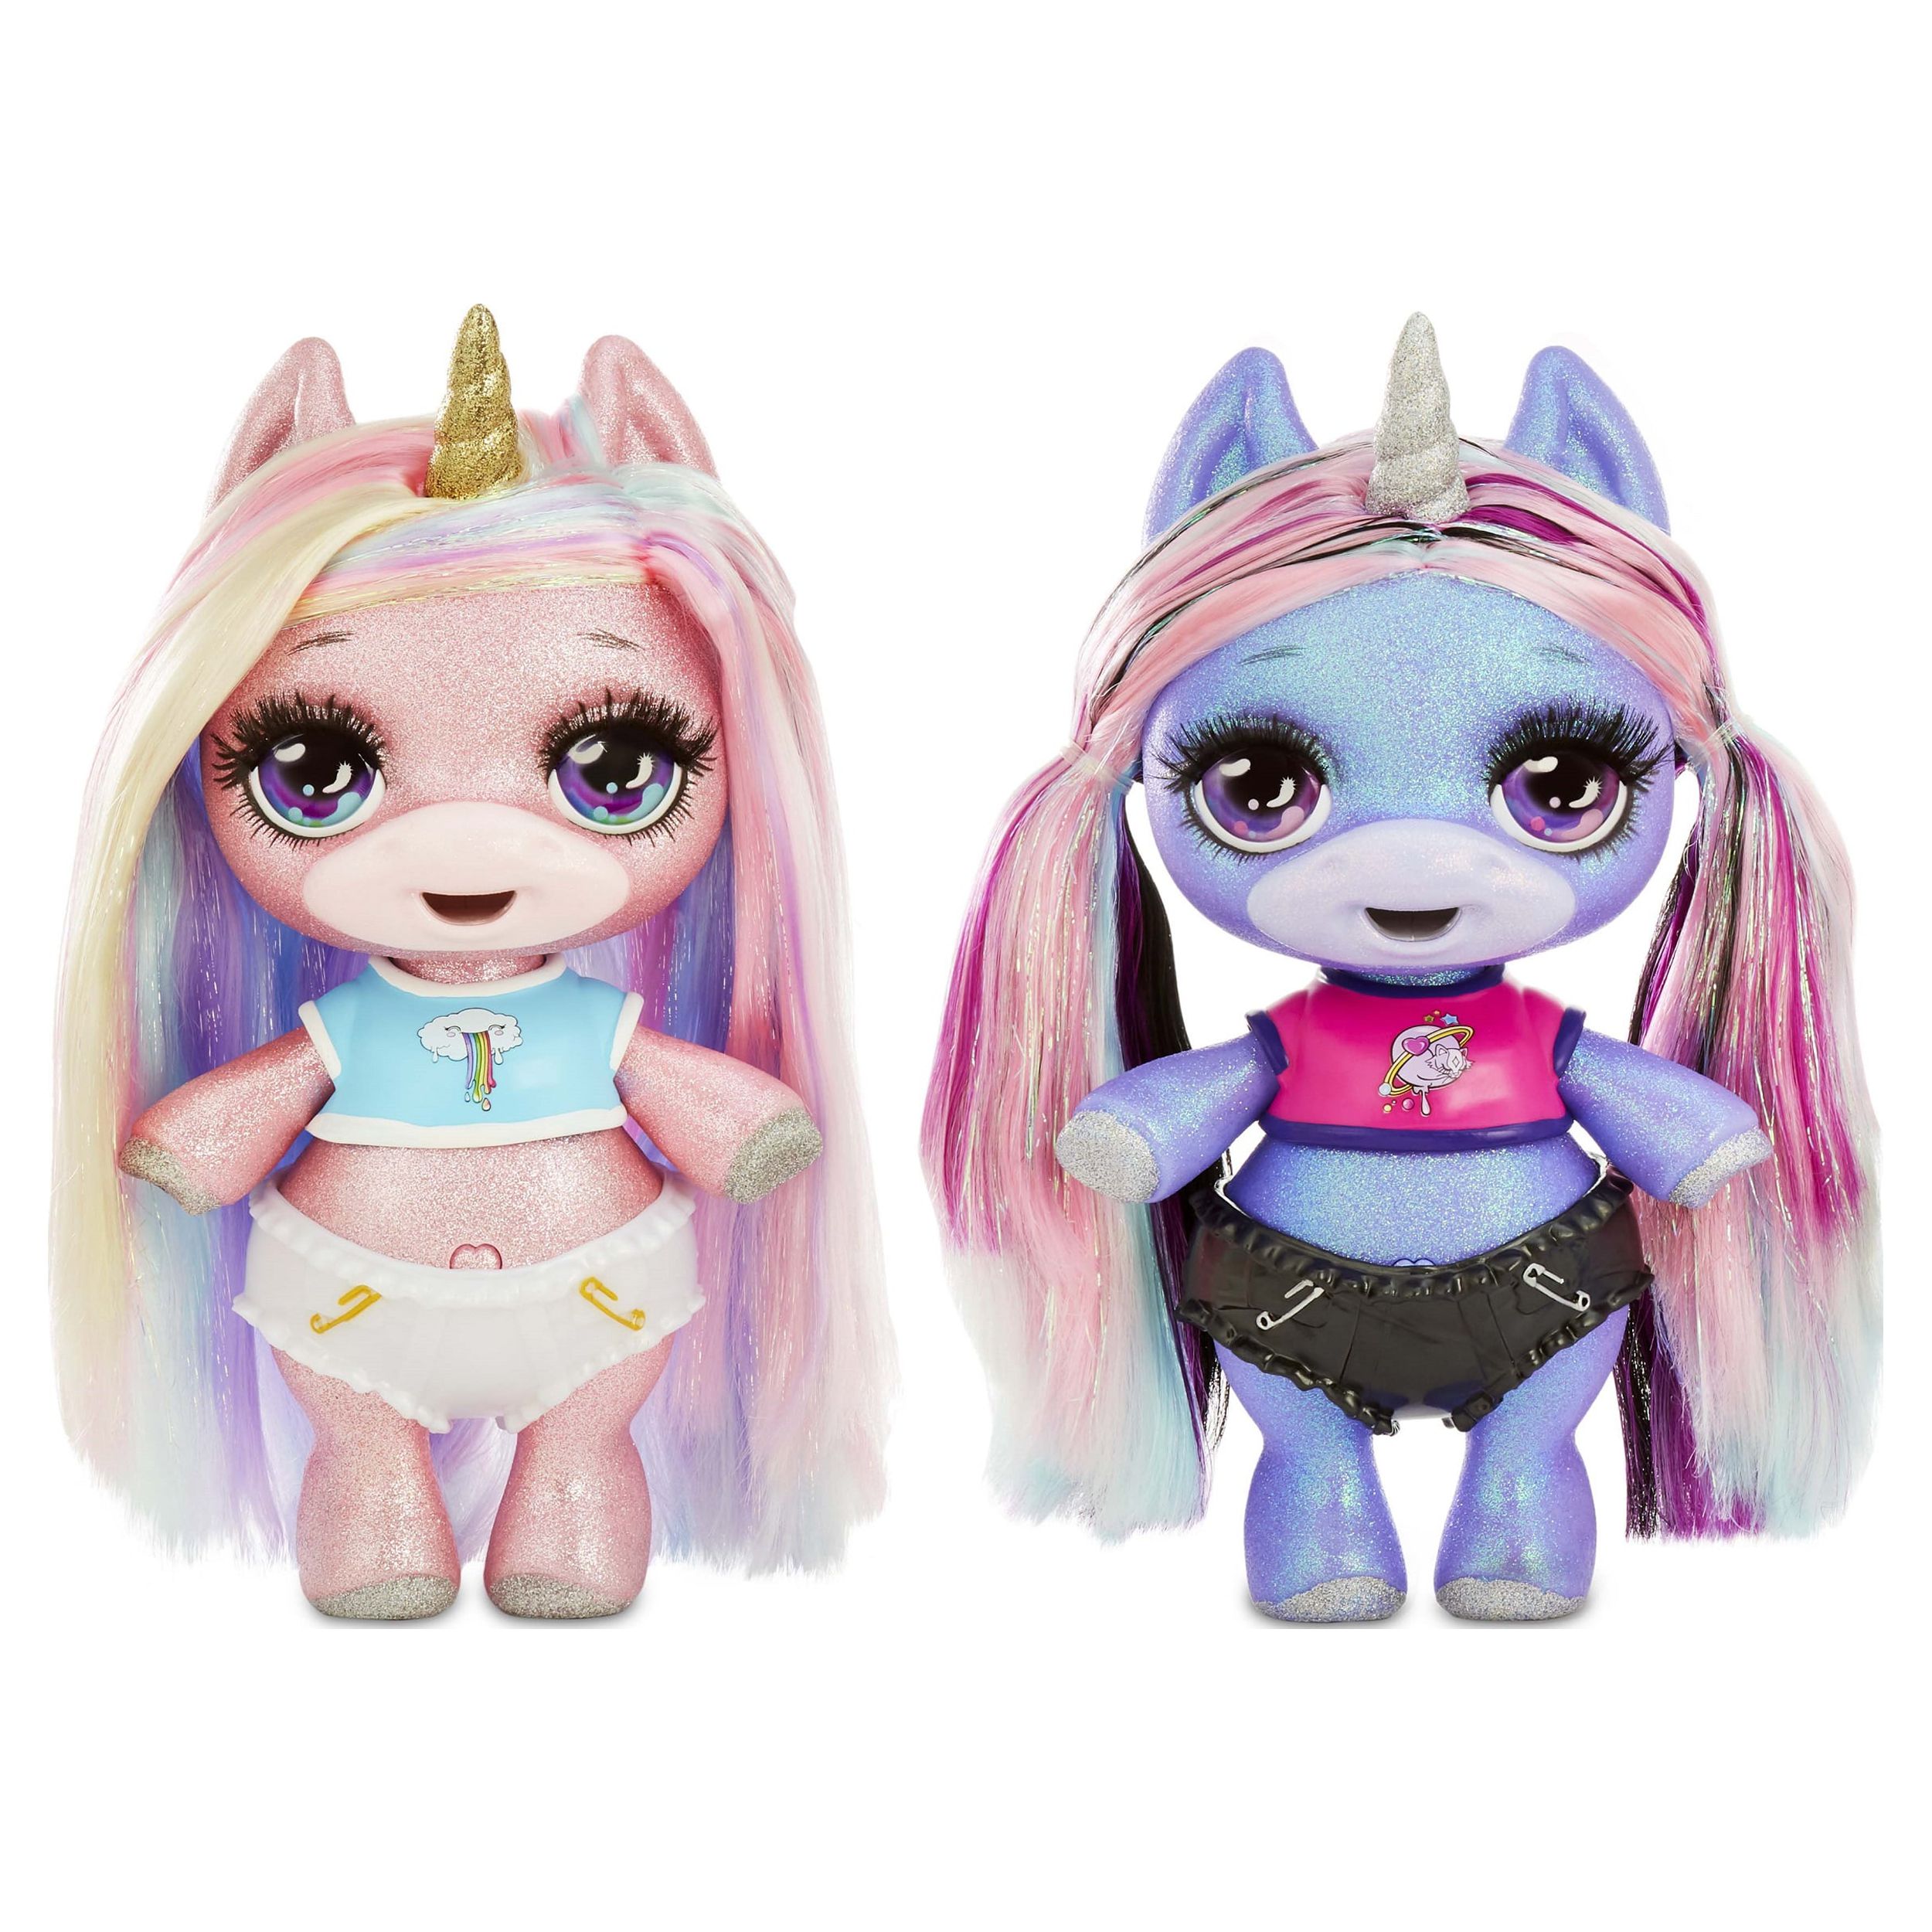 Poopsie Slime Surprise Glitter Unicorn: Stardust Sparkle or Blingy Beauty, 12" Doll with 20+ Magical Surprises - image 4 of 6